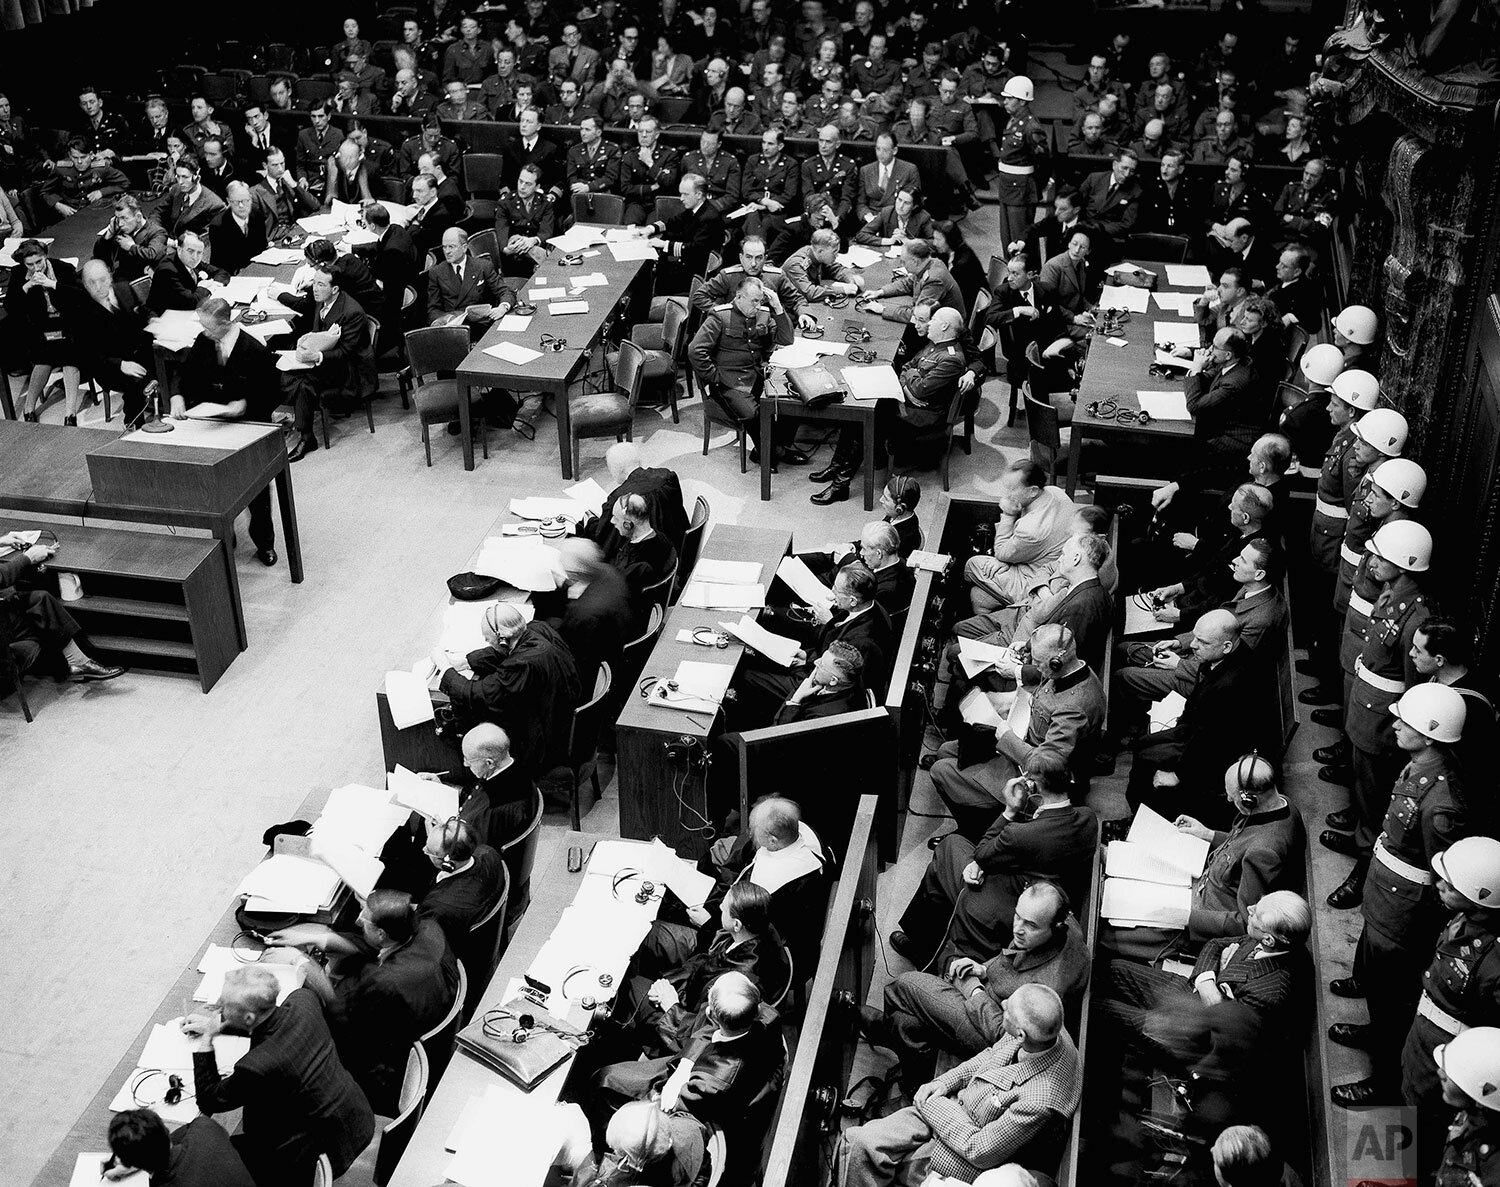  A general view of the courtroom during the first morning session in Nuremberg on Nov. 20, 1945. In foreground, left, sit the defendants with a row of guards behind them and their counsel sitting in front of them. (AP Photo/B.I. Sanders) 